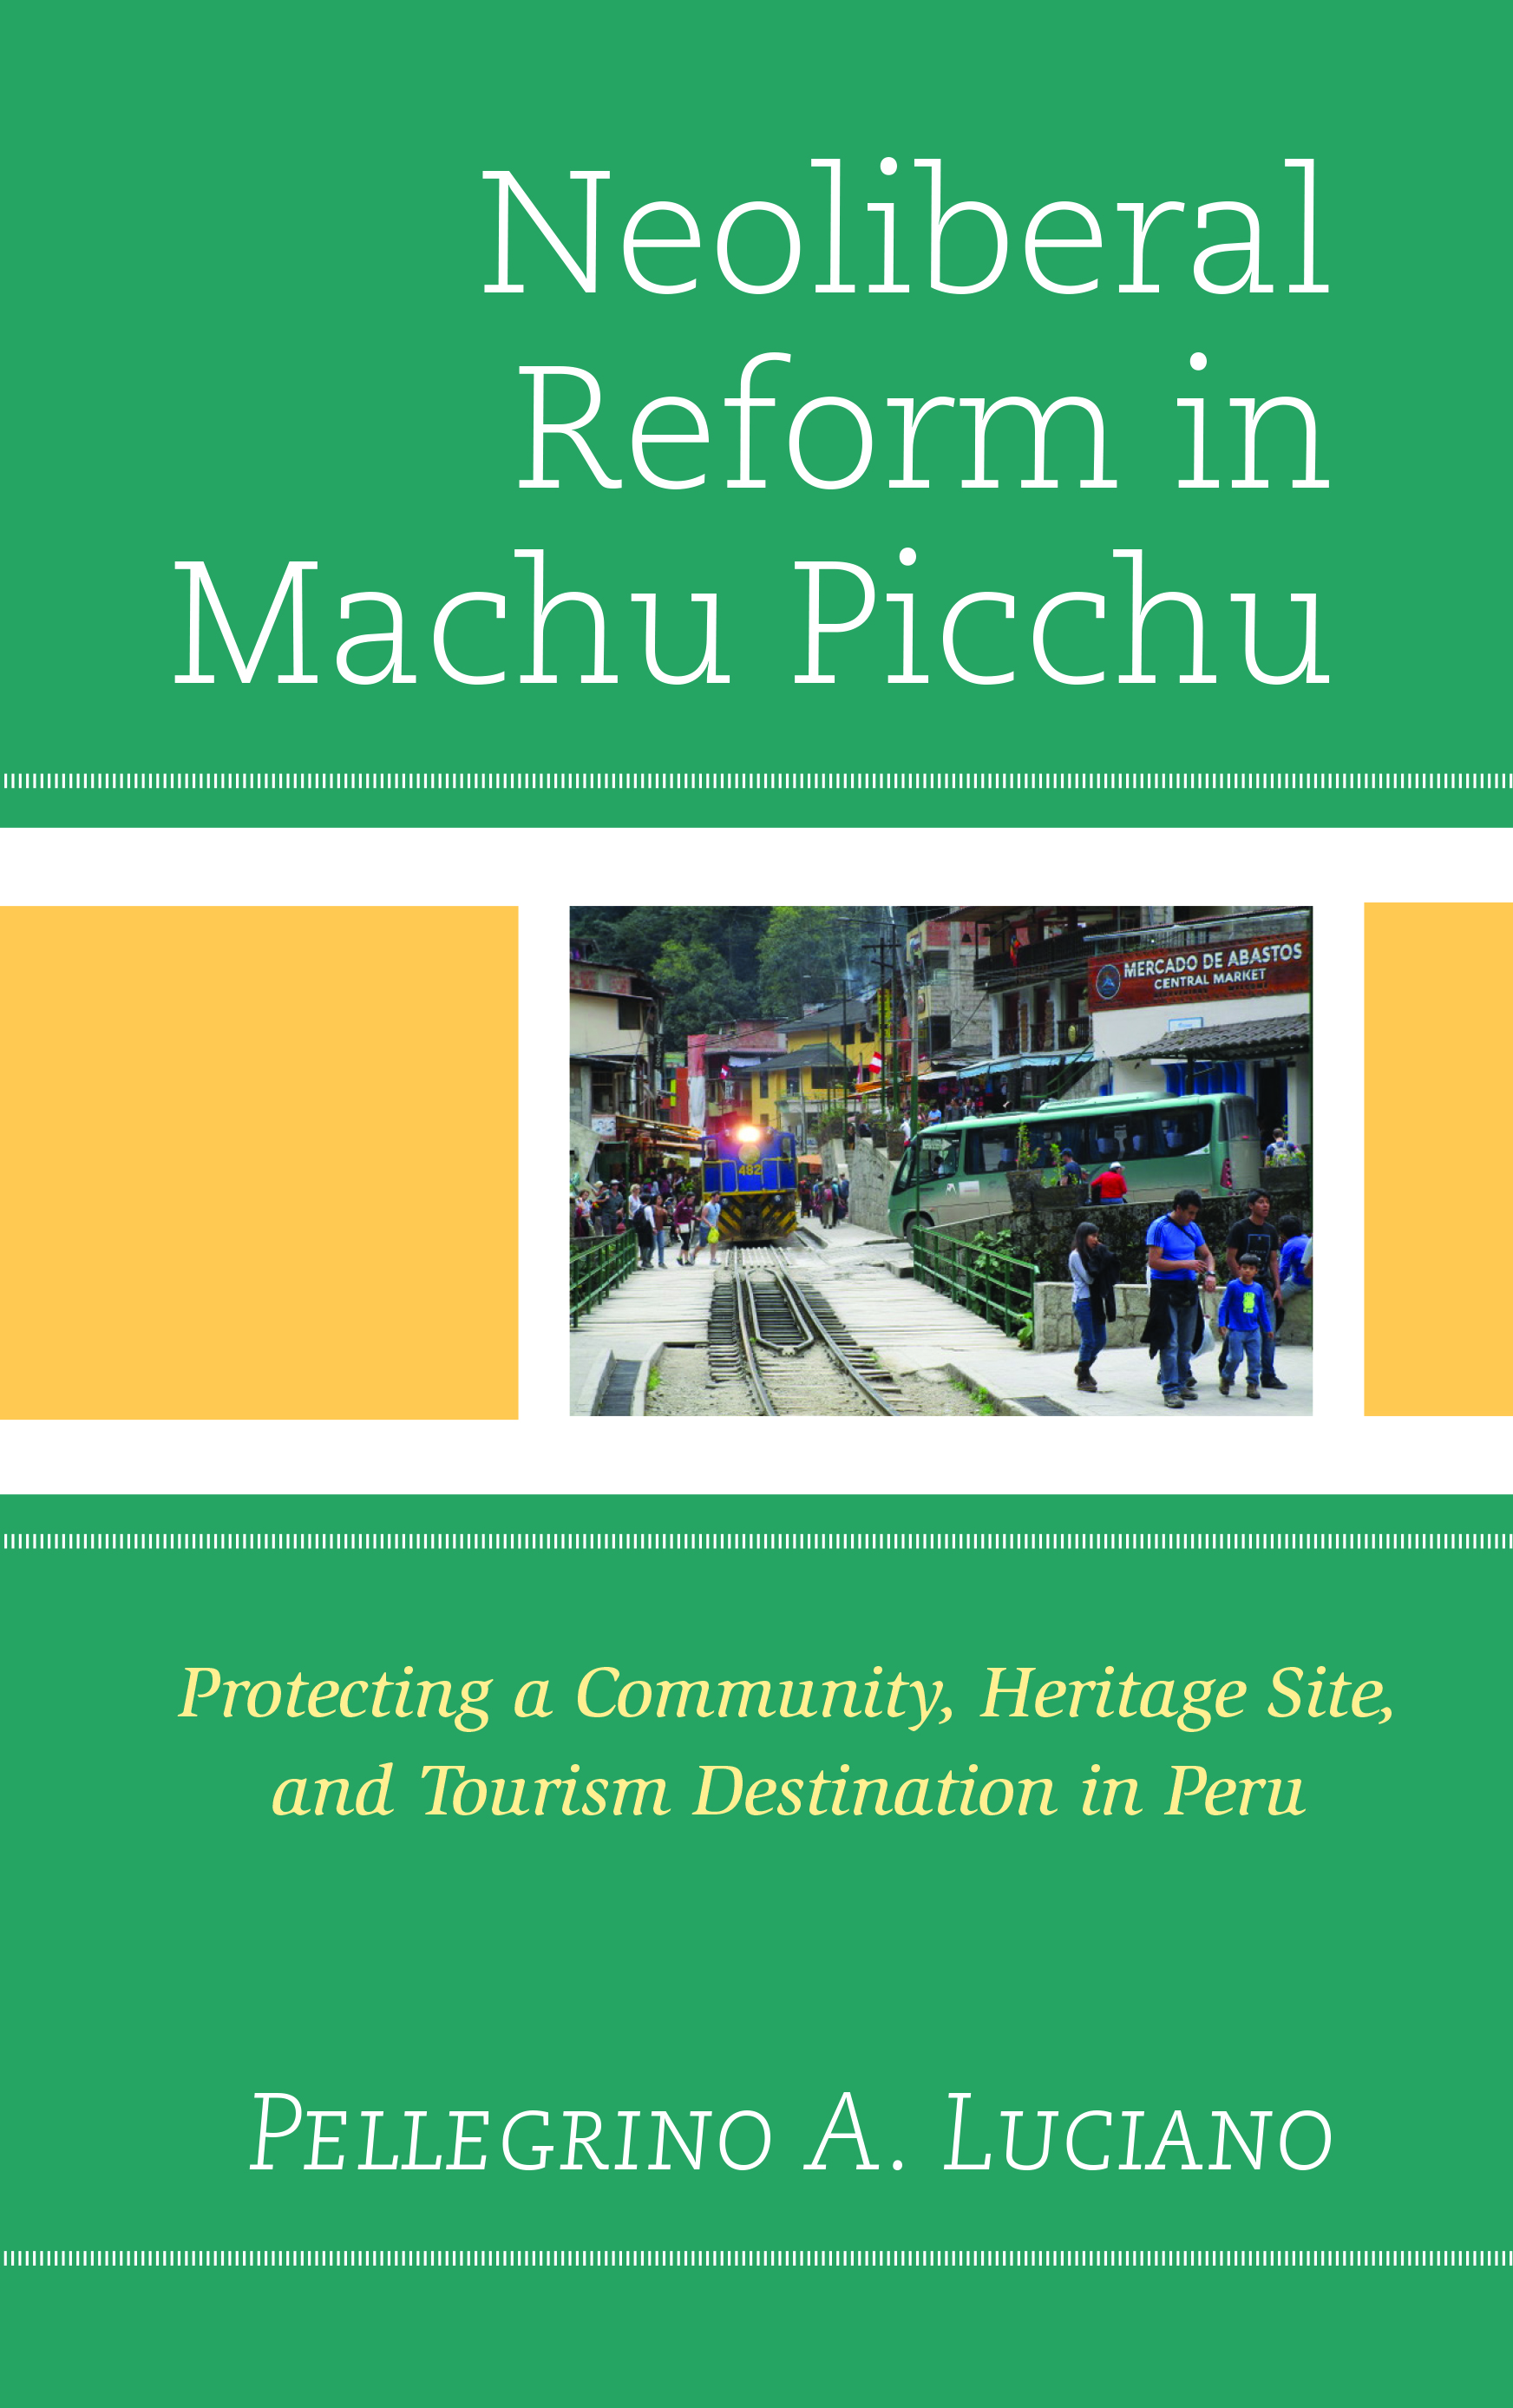 Neoliberal Reform in Machu Picchu: Protecting a Community, Heritage Site, and Tourism Destination in Peru